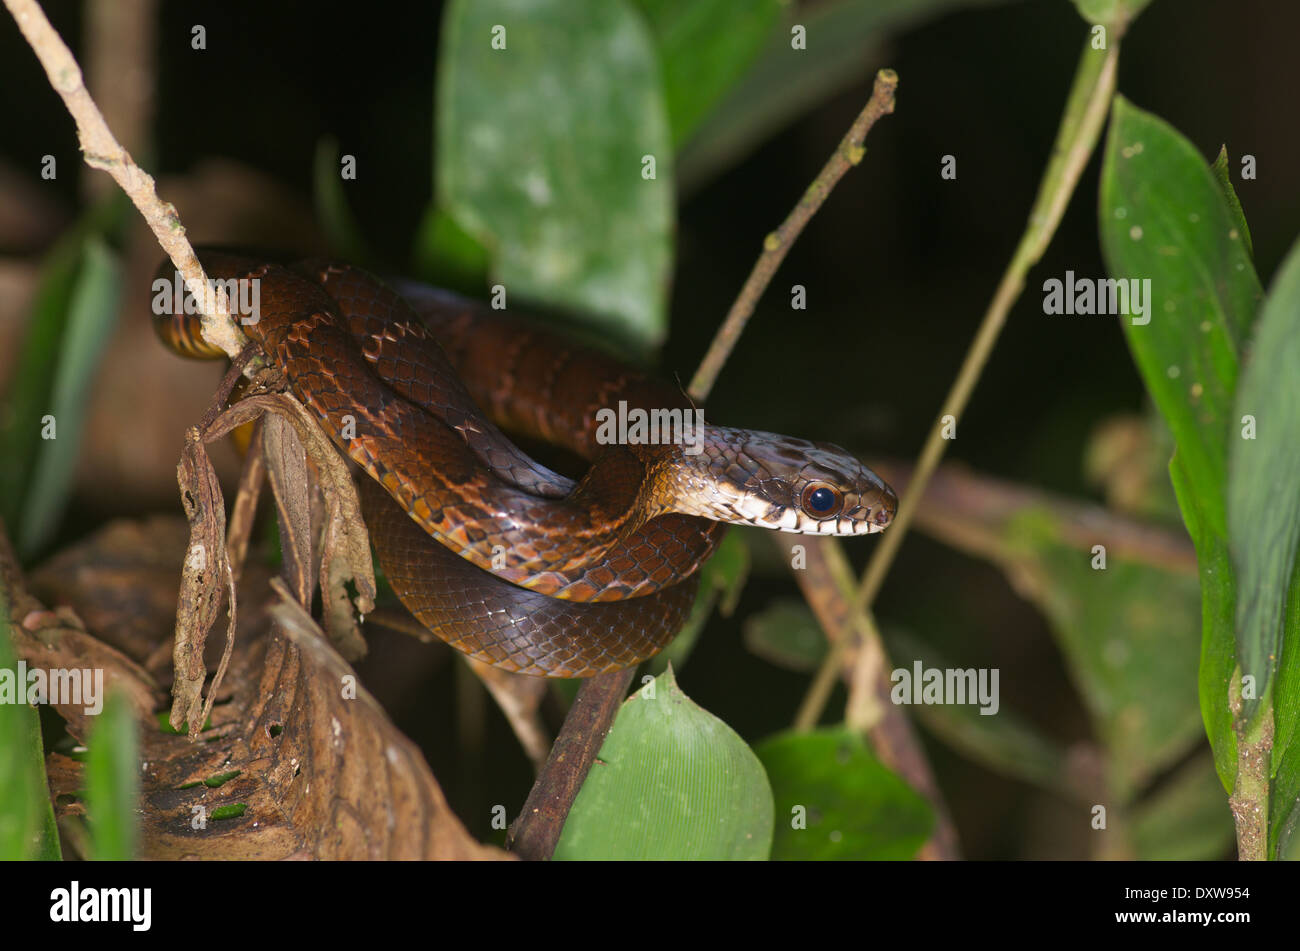 A young Common Glossy Racer (Drymoluber dichrous) coiled at night in the Amazon basin in Peru. Stock Photo